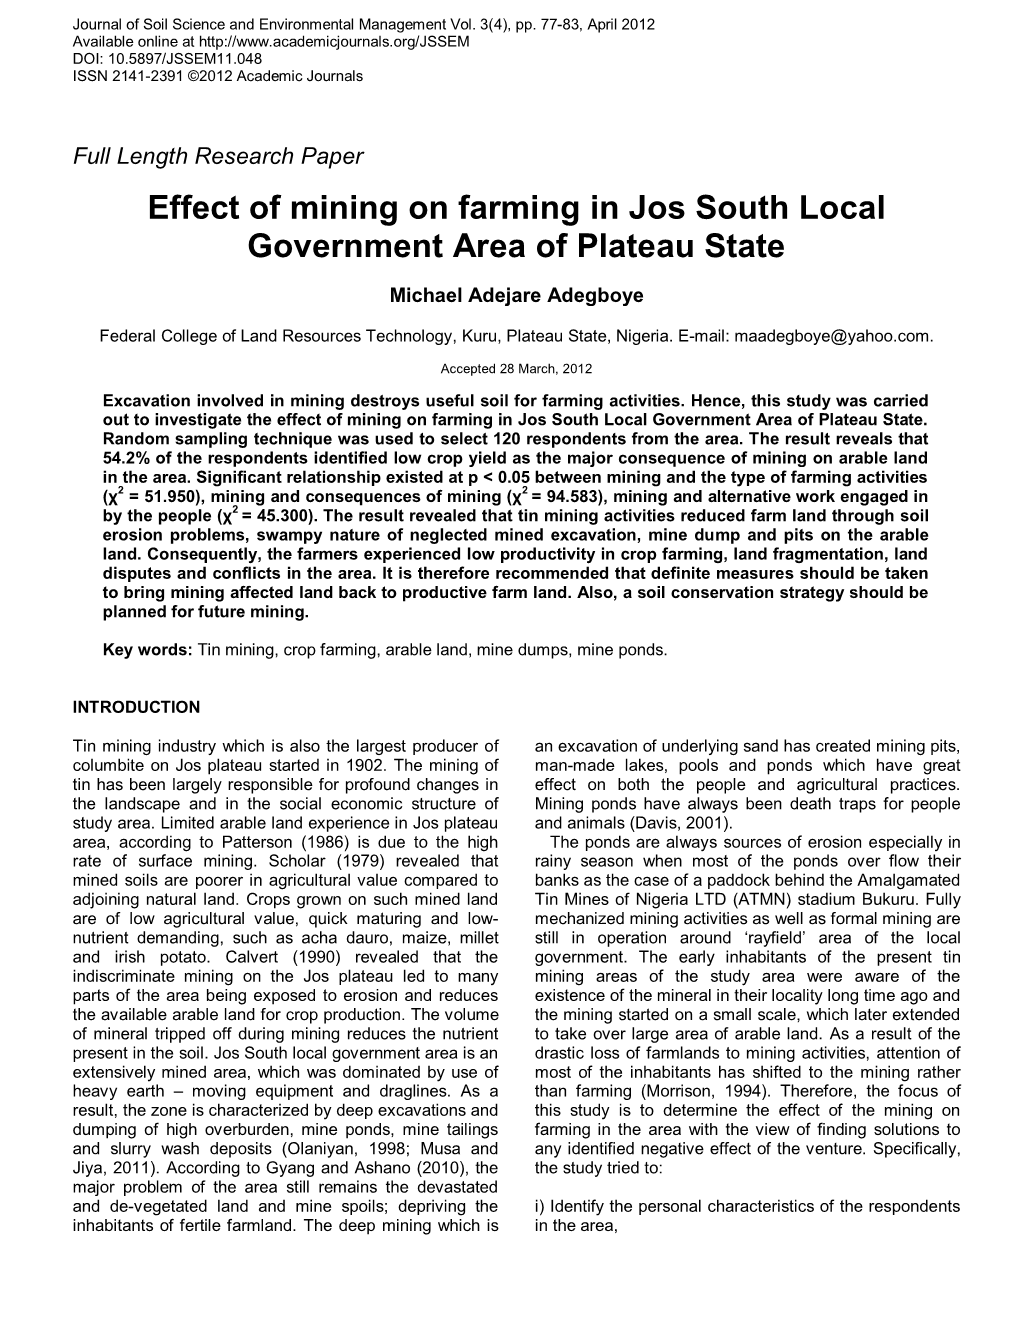 Effect of Mining on Farming in Jos South Local Government Area of Plateau State